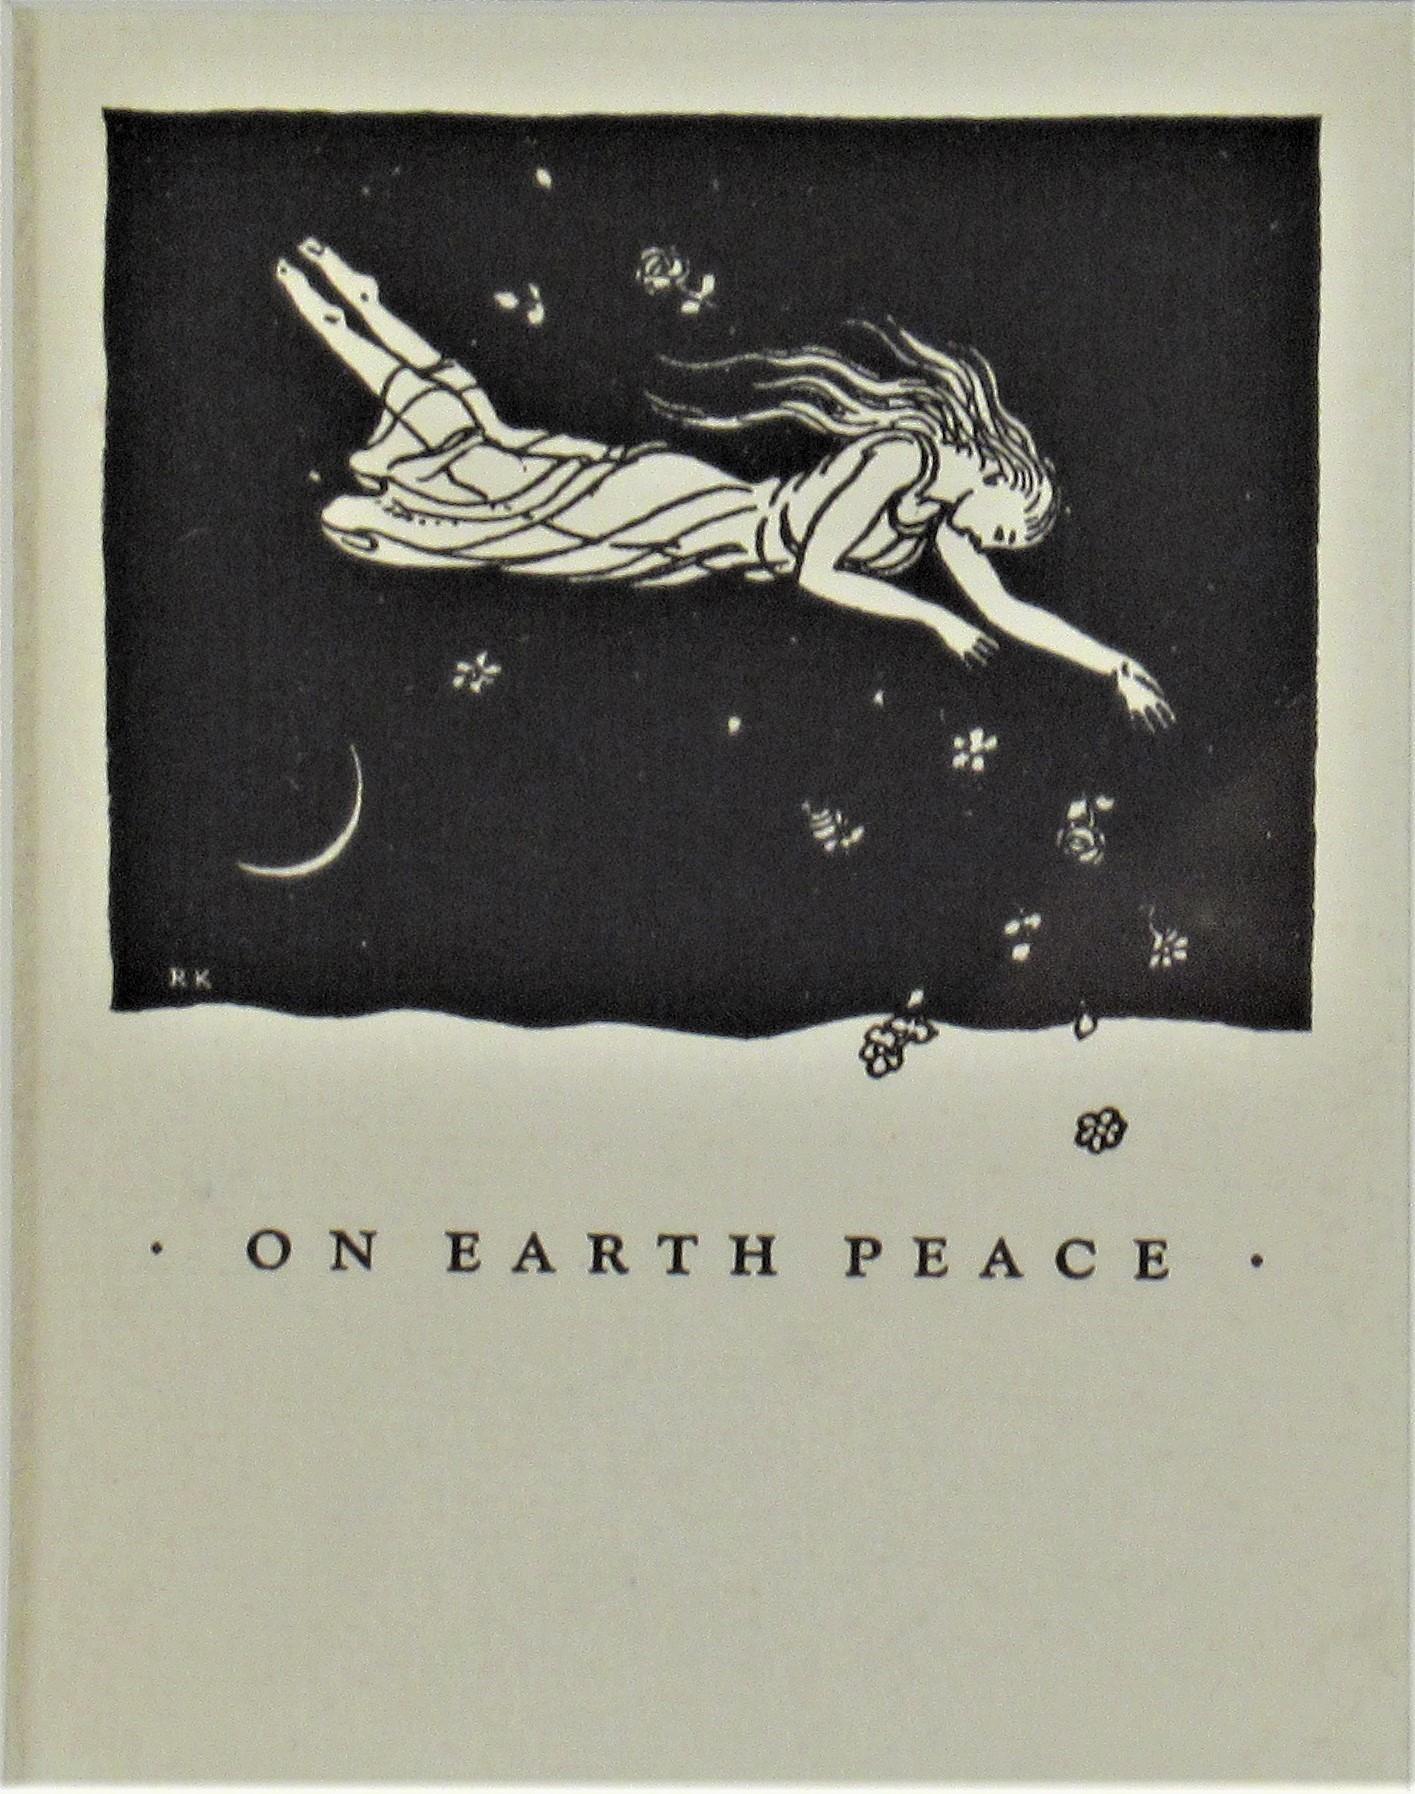 On Hearth Peace - Print by Rockwell Kent